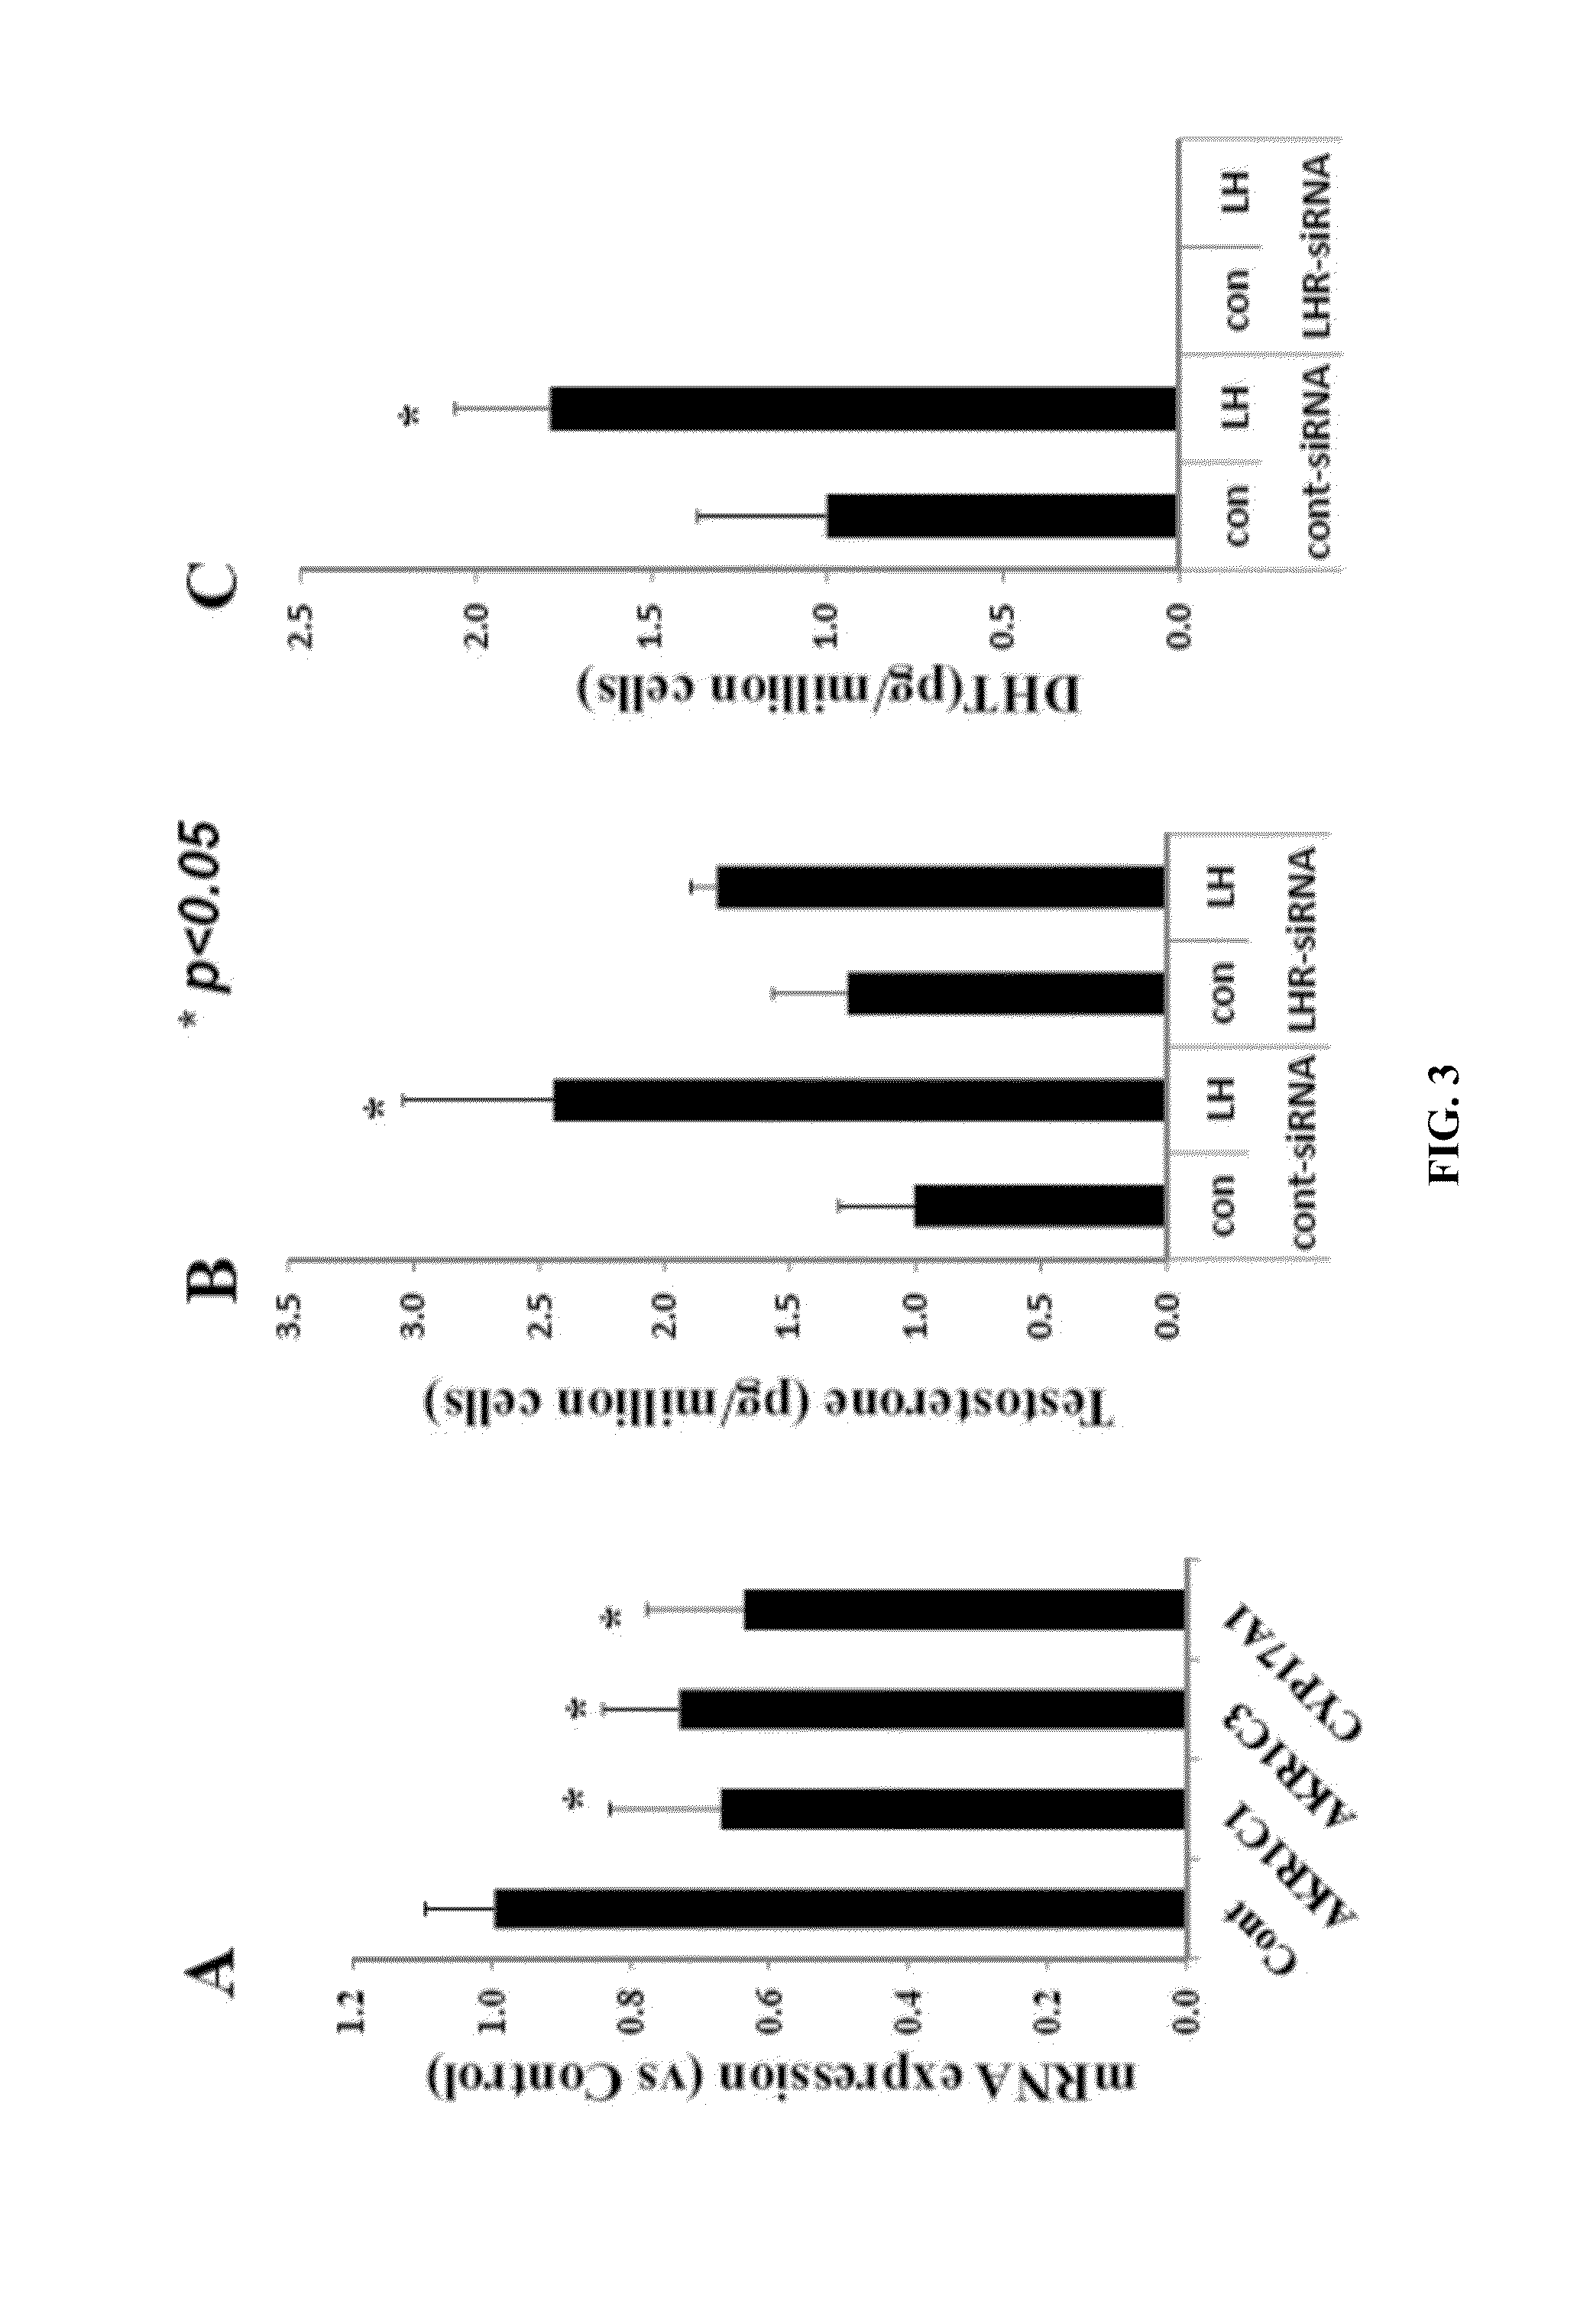 Compositions and methods for regulating cancer-related signaling pathways